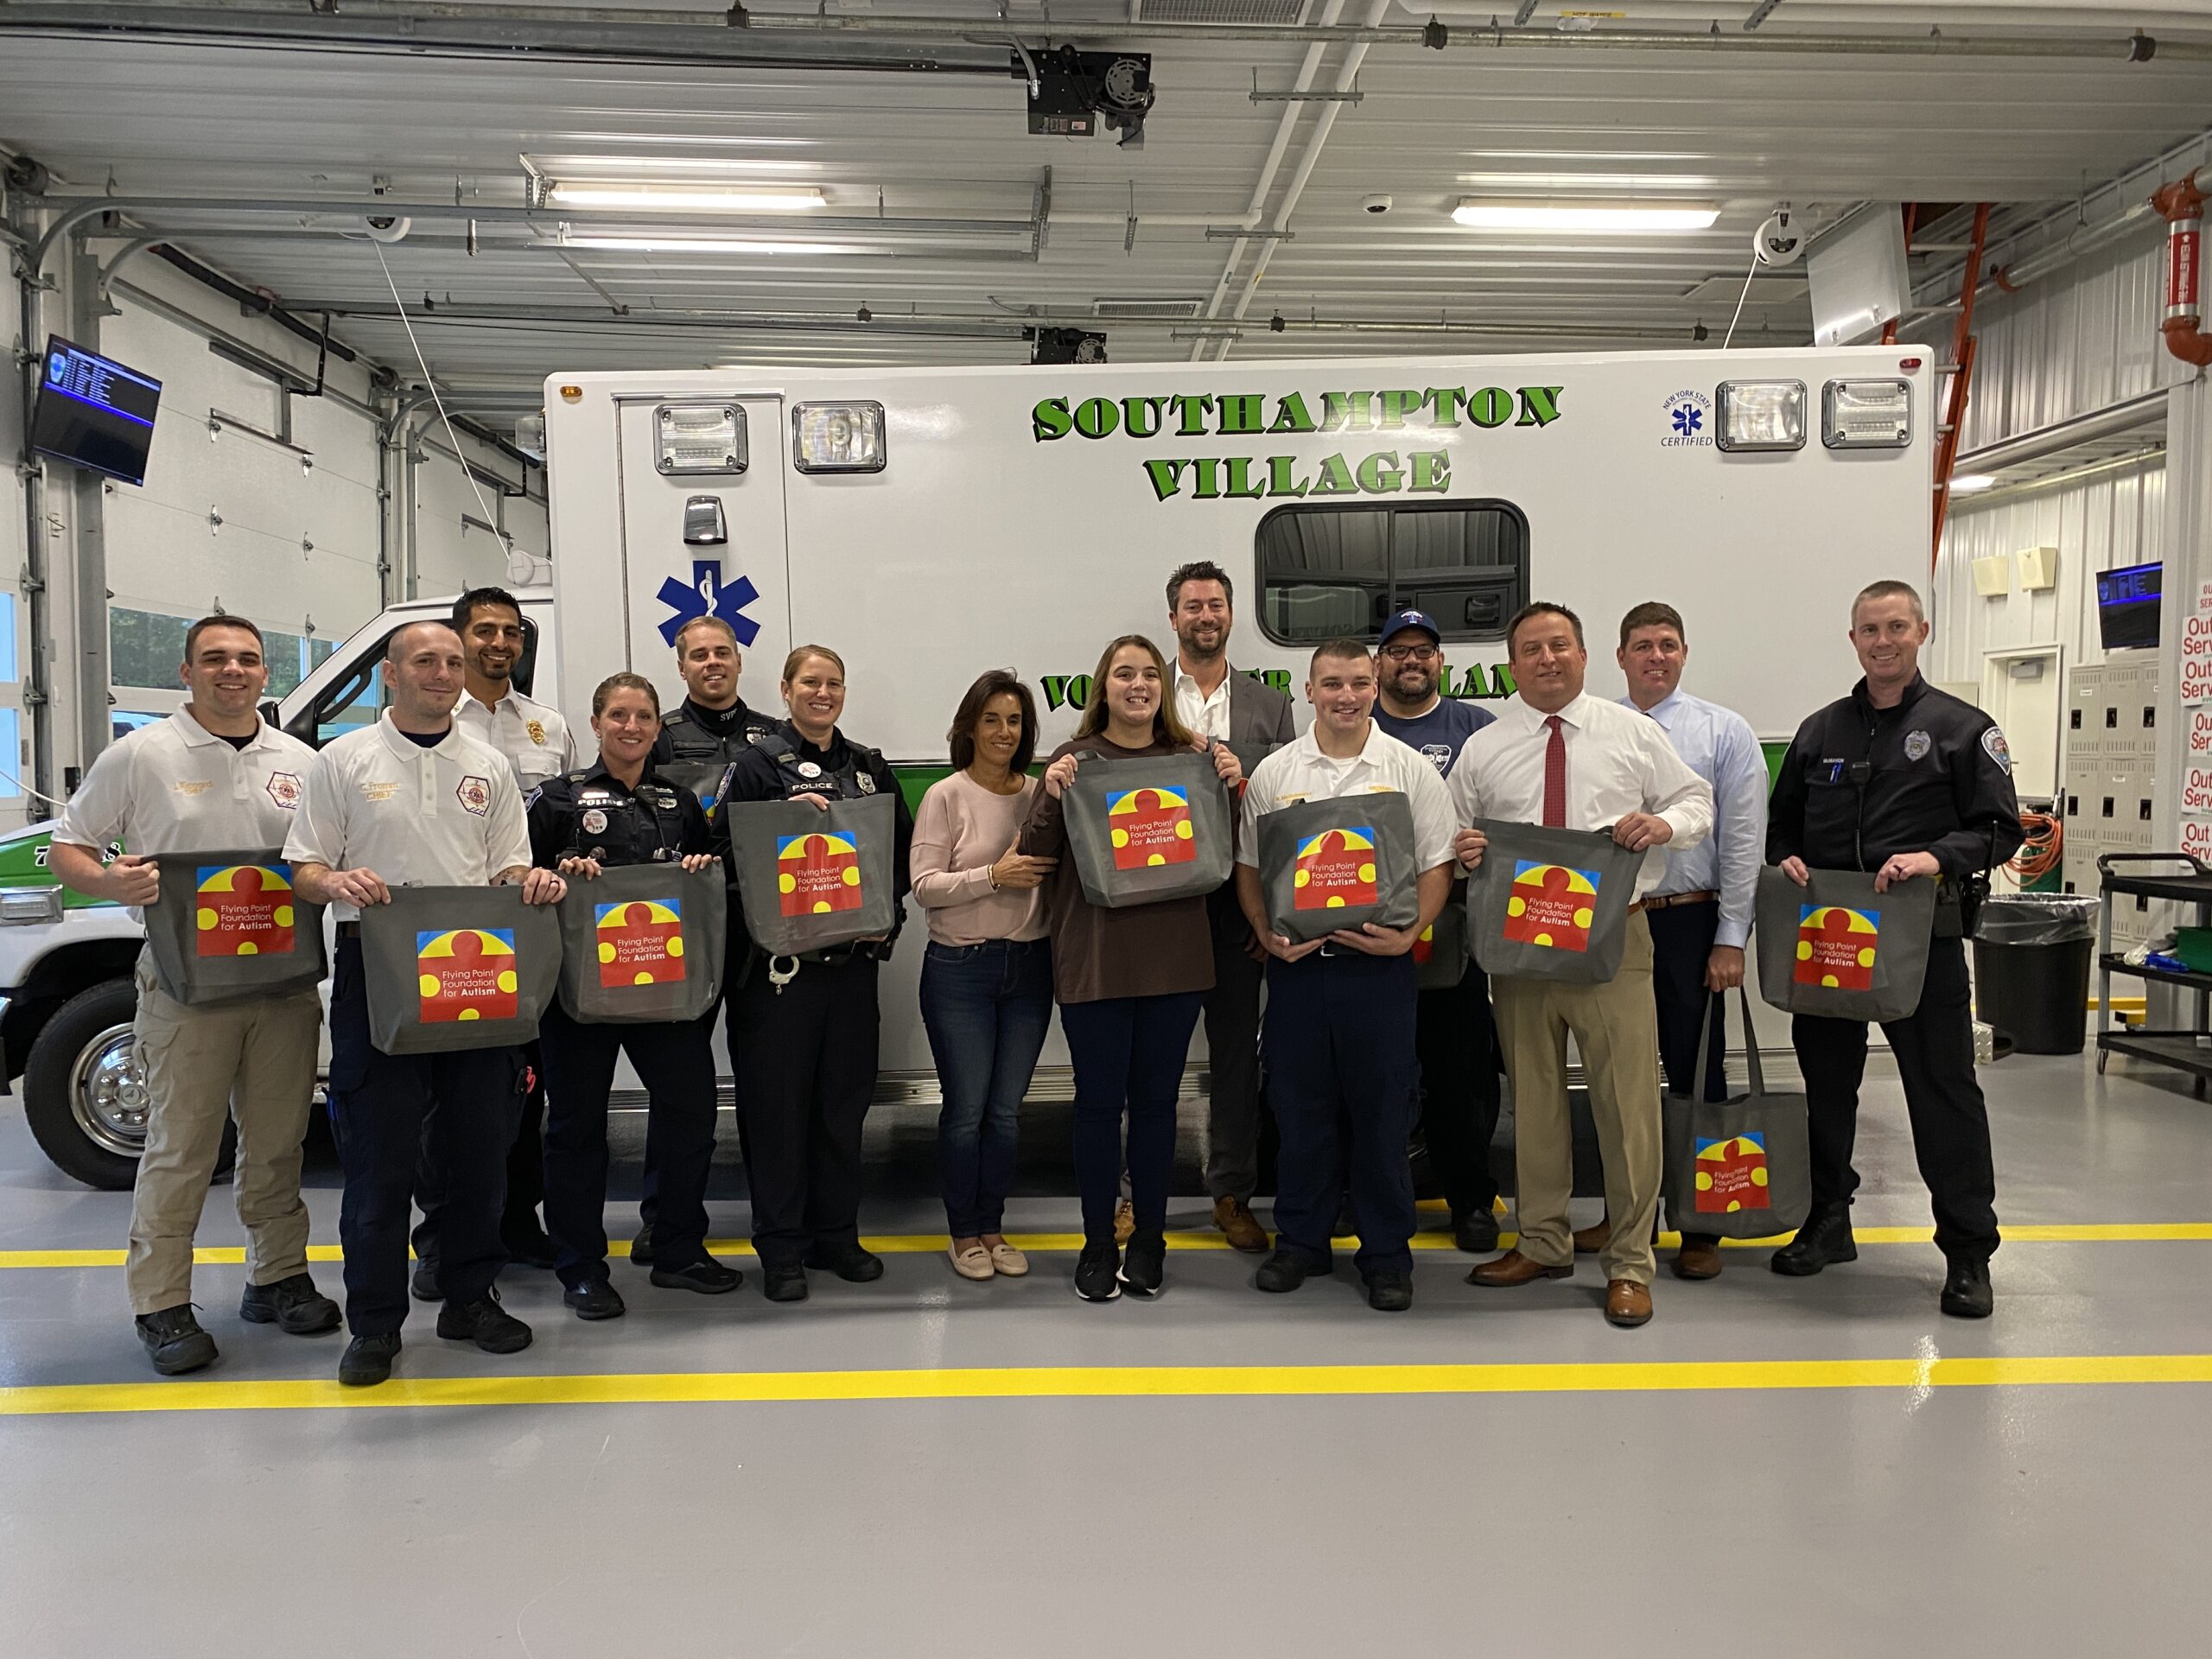 Patty Tuzzolo, center, an executive board member of the Flying Point Foundation for Autism and her daughter Anna, who has autism, recently delivered FPF-GoBags to representatives of the Southampton Town Police Department, Southampton Village Police Department, Southampton Village EMS, Southampton Town EMS and Southampton Fire Department. COURTESY FLYING POINT FOUNDATION FOR AUTISM